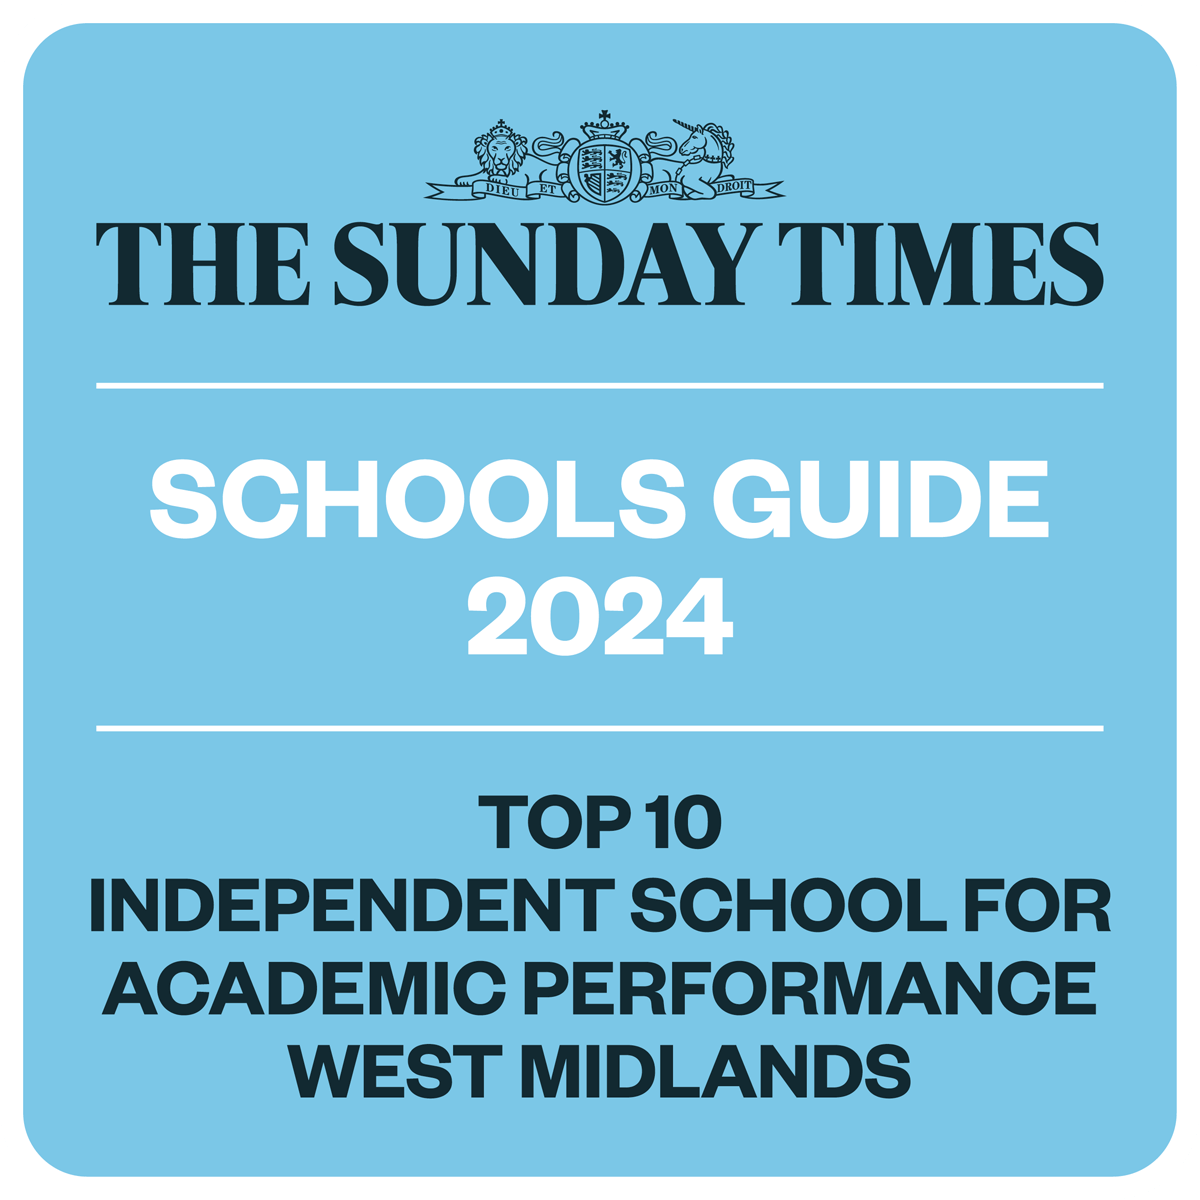 The Sunday Times Schools Guide 2024 - Top 10 Independent School For Academic Performance In The West Midlands